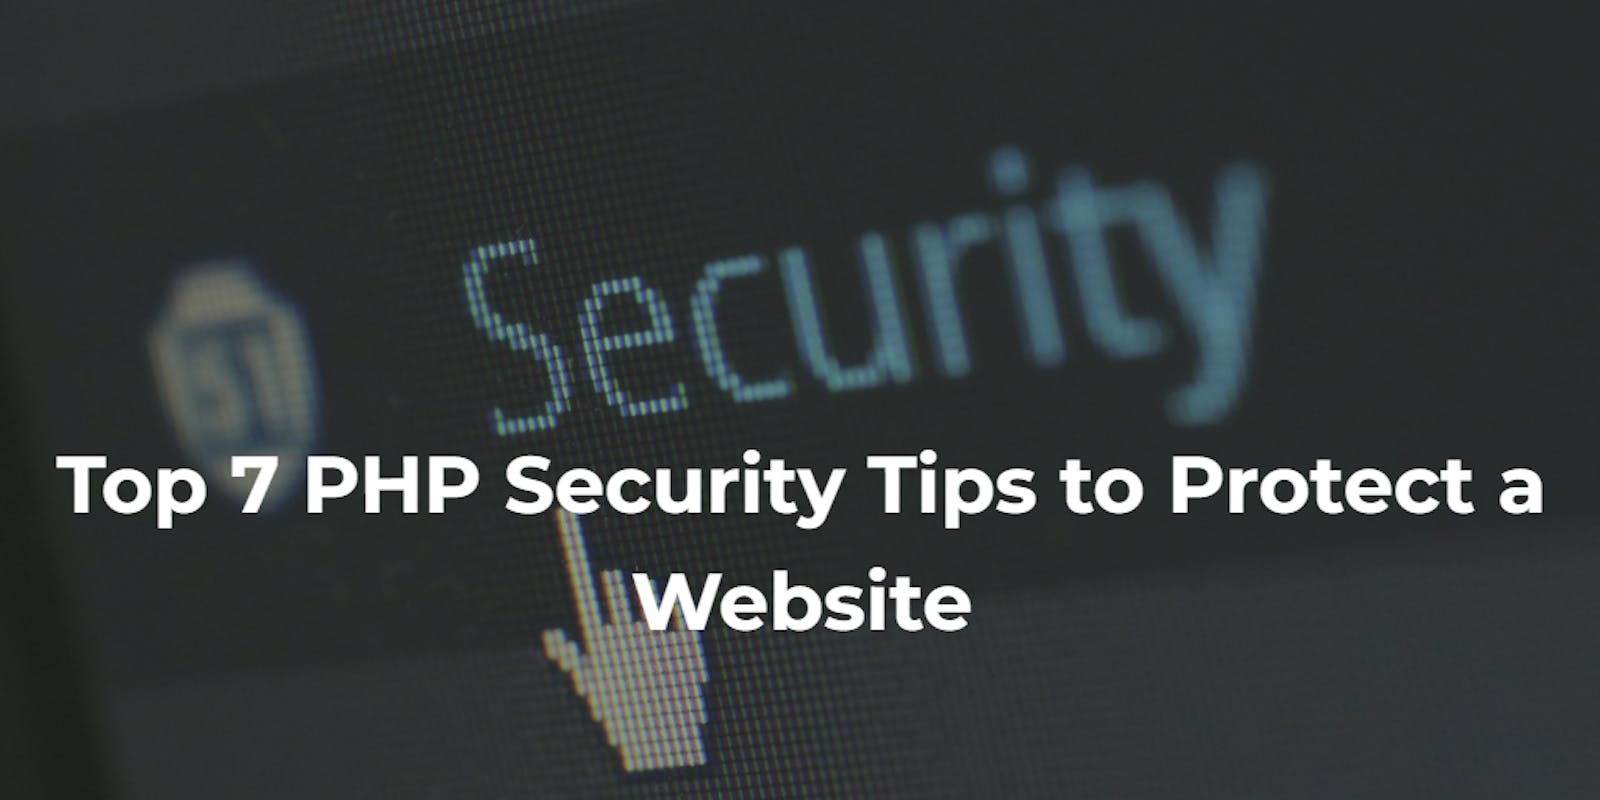 Top 7 PHP Security Tips to Protect a Website